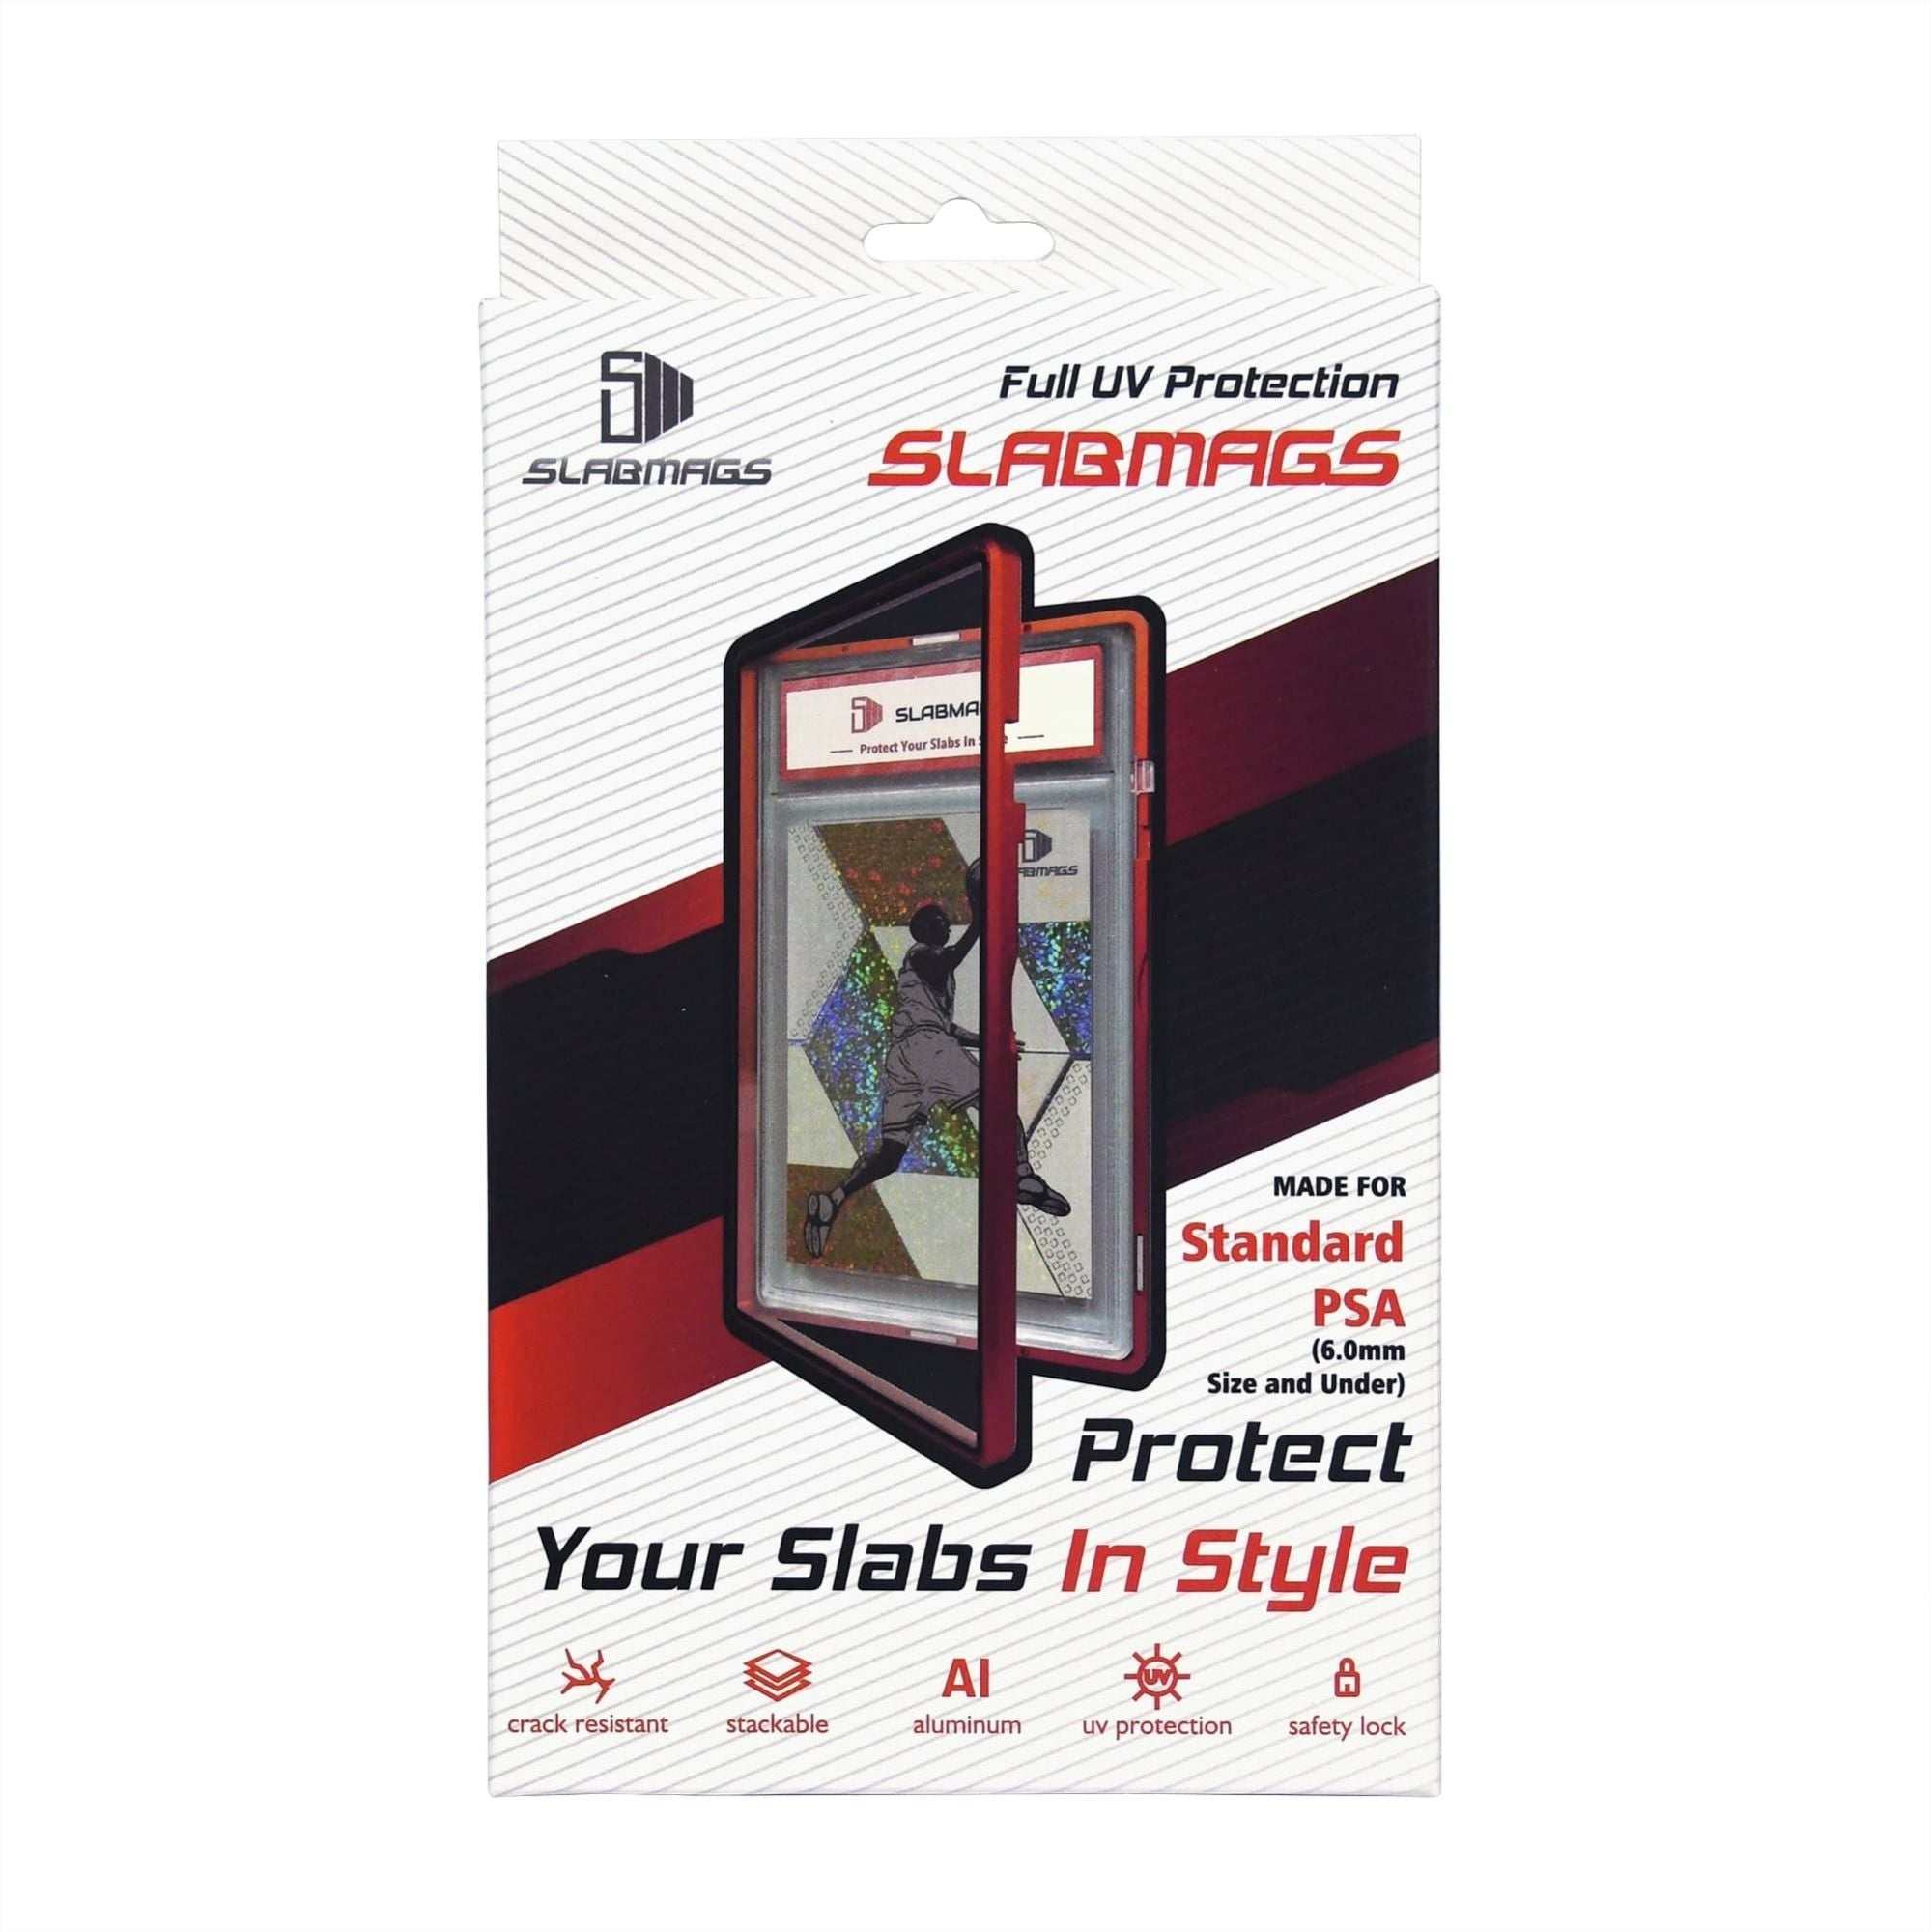 Slabmags RED Made For Standard PSA Slabs (Compatible con los